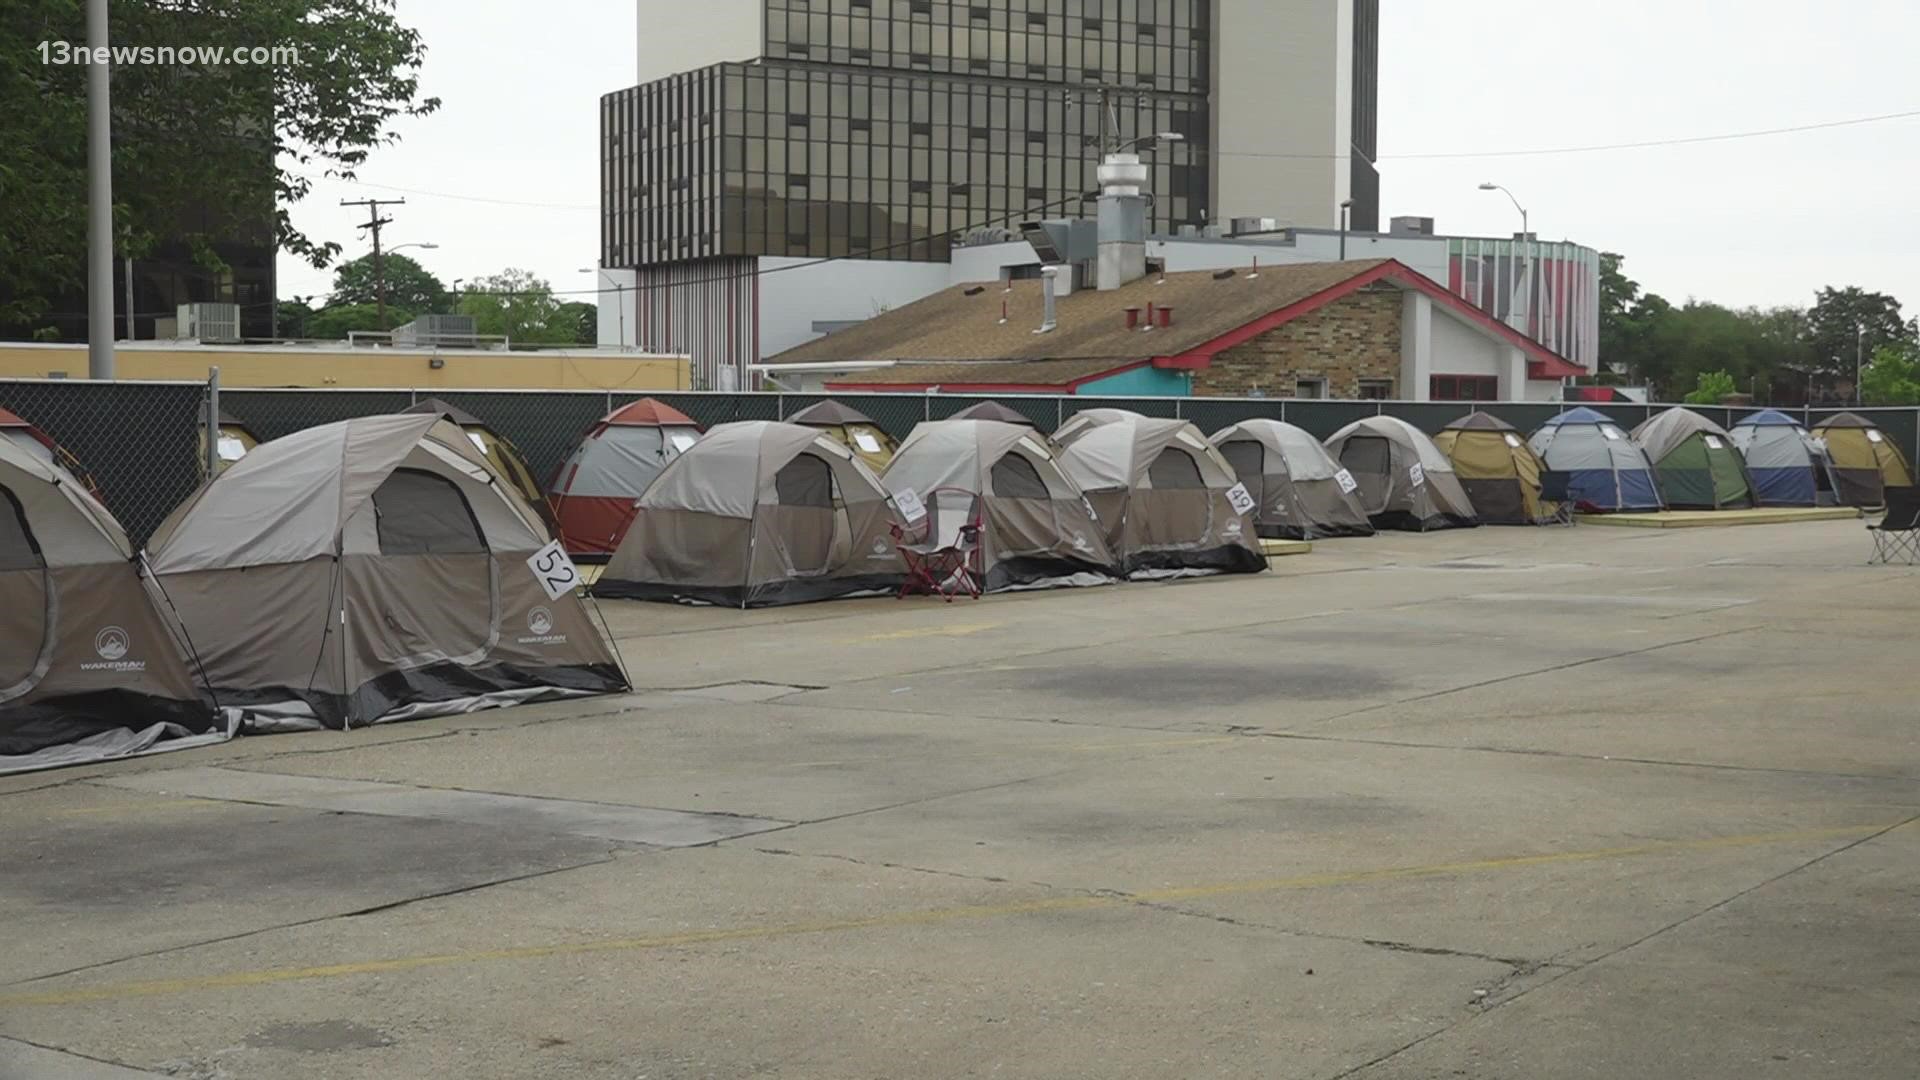 Homeless people in Norfolk are being relocated after staying at the greyhound bus station.